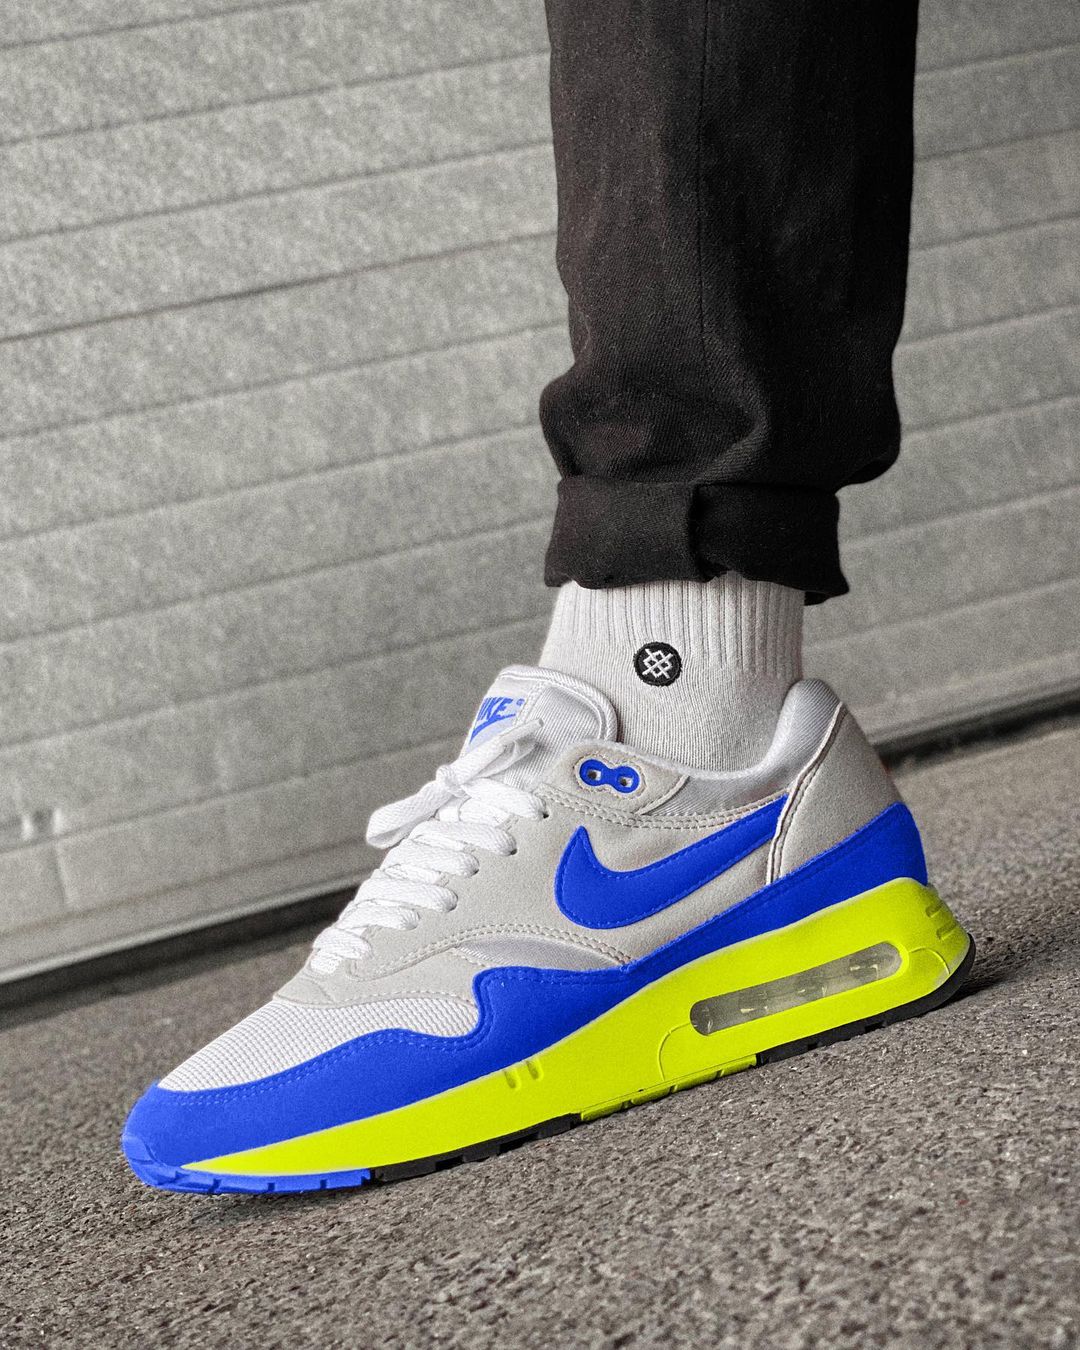 Aanpassingsvermogen etiquette Ontrouw Sneaker News on Twitter: "Nike Air Max 1 "3.26" ("Royal") mock-up 💭 Rumor  has it this pair will drop for Air Max Day 2024. https://t.co/BjBxN8HOOY" /  Twitter